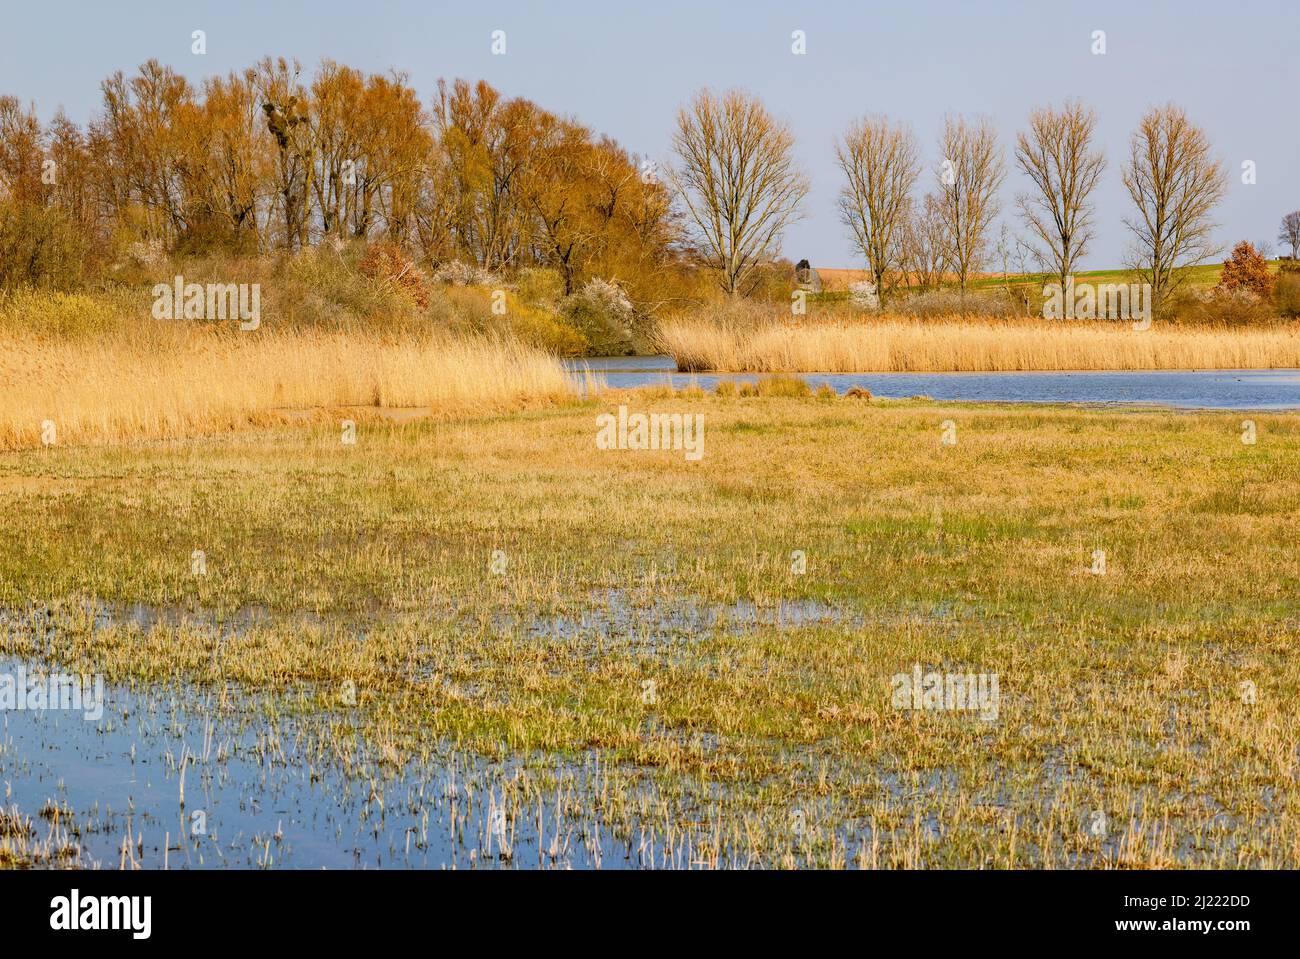 A swamp area on the shore of a standing body of water is an idyllic natural paradise in Germany Stock Photo